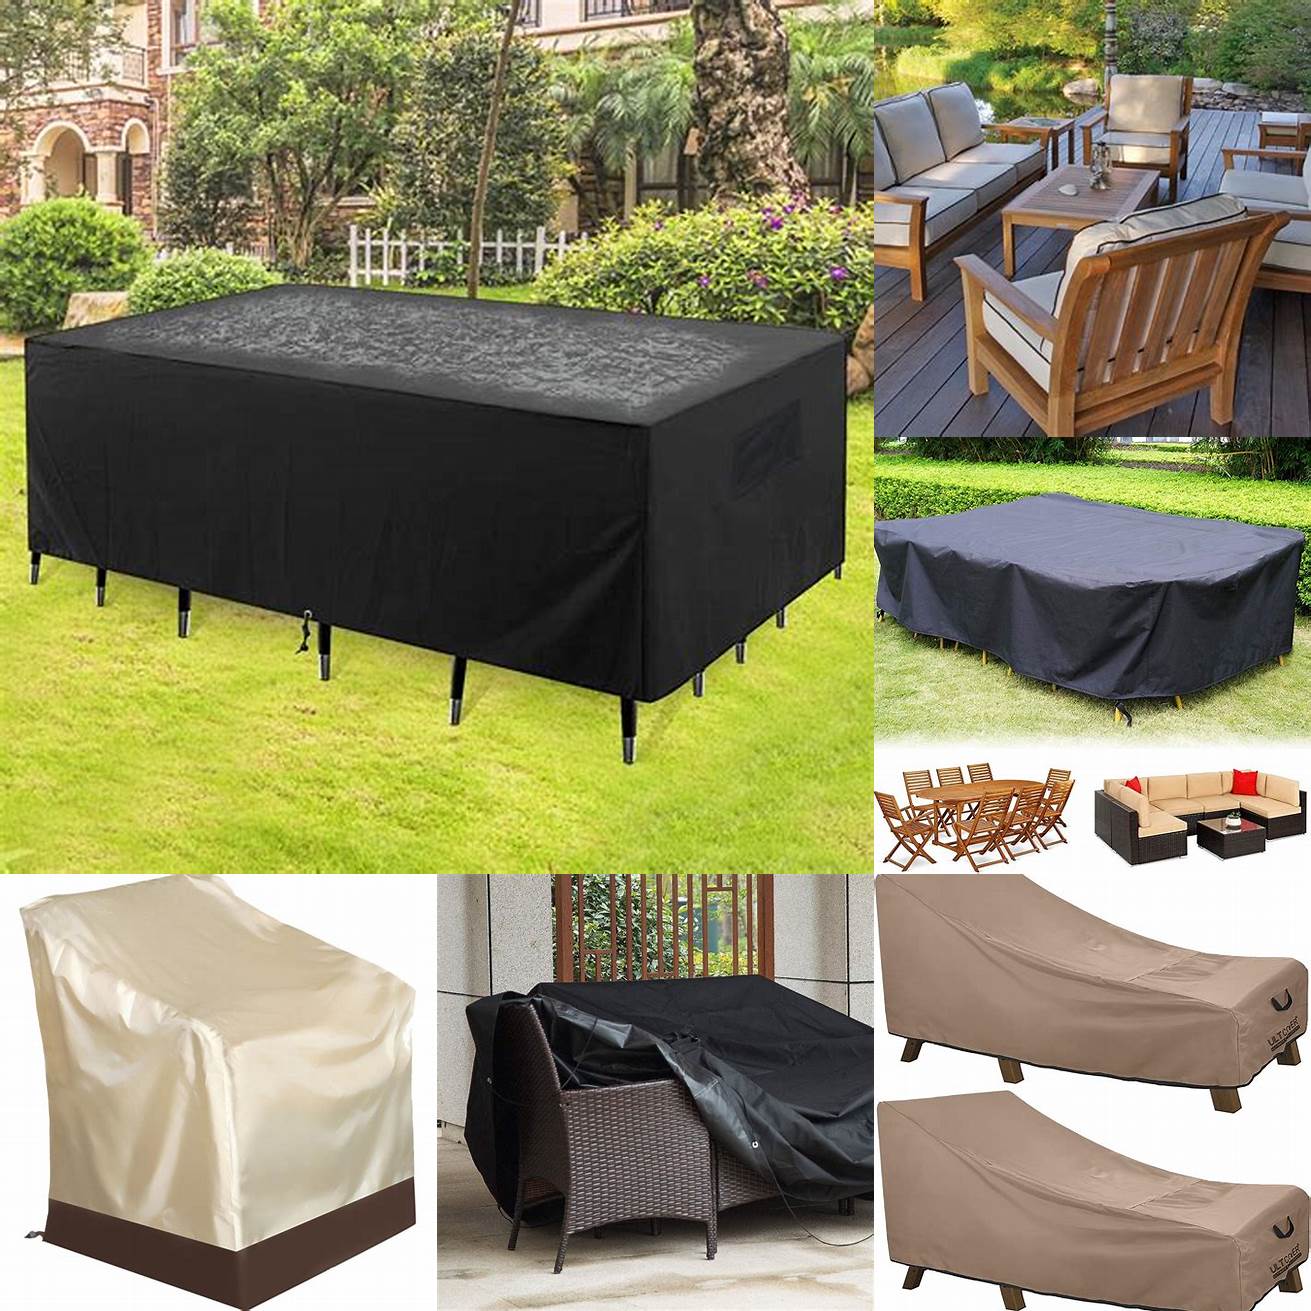 Outdoor Teak Furniture Covered with a Waterproof Cover